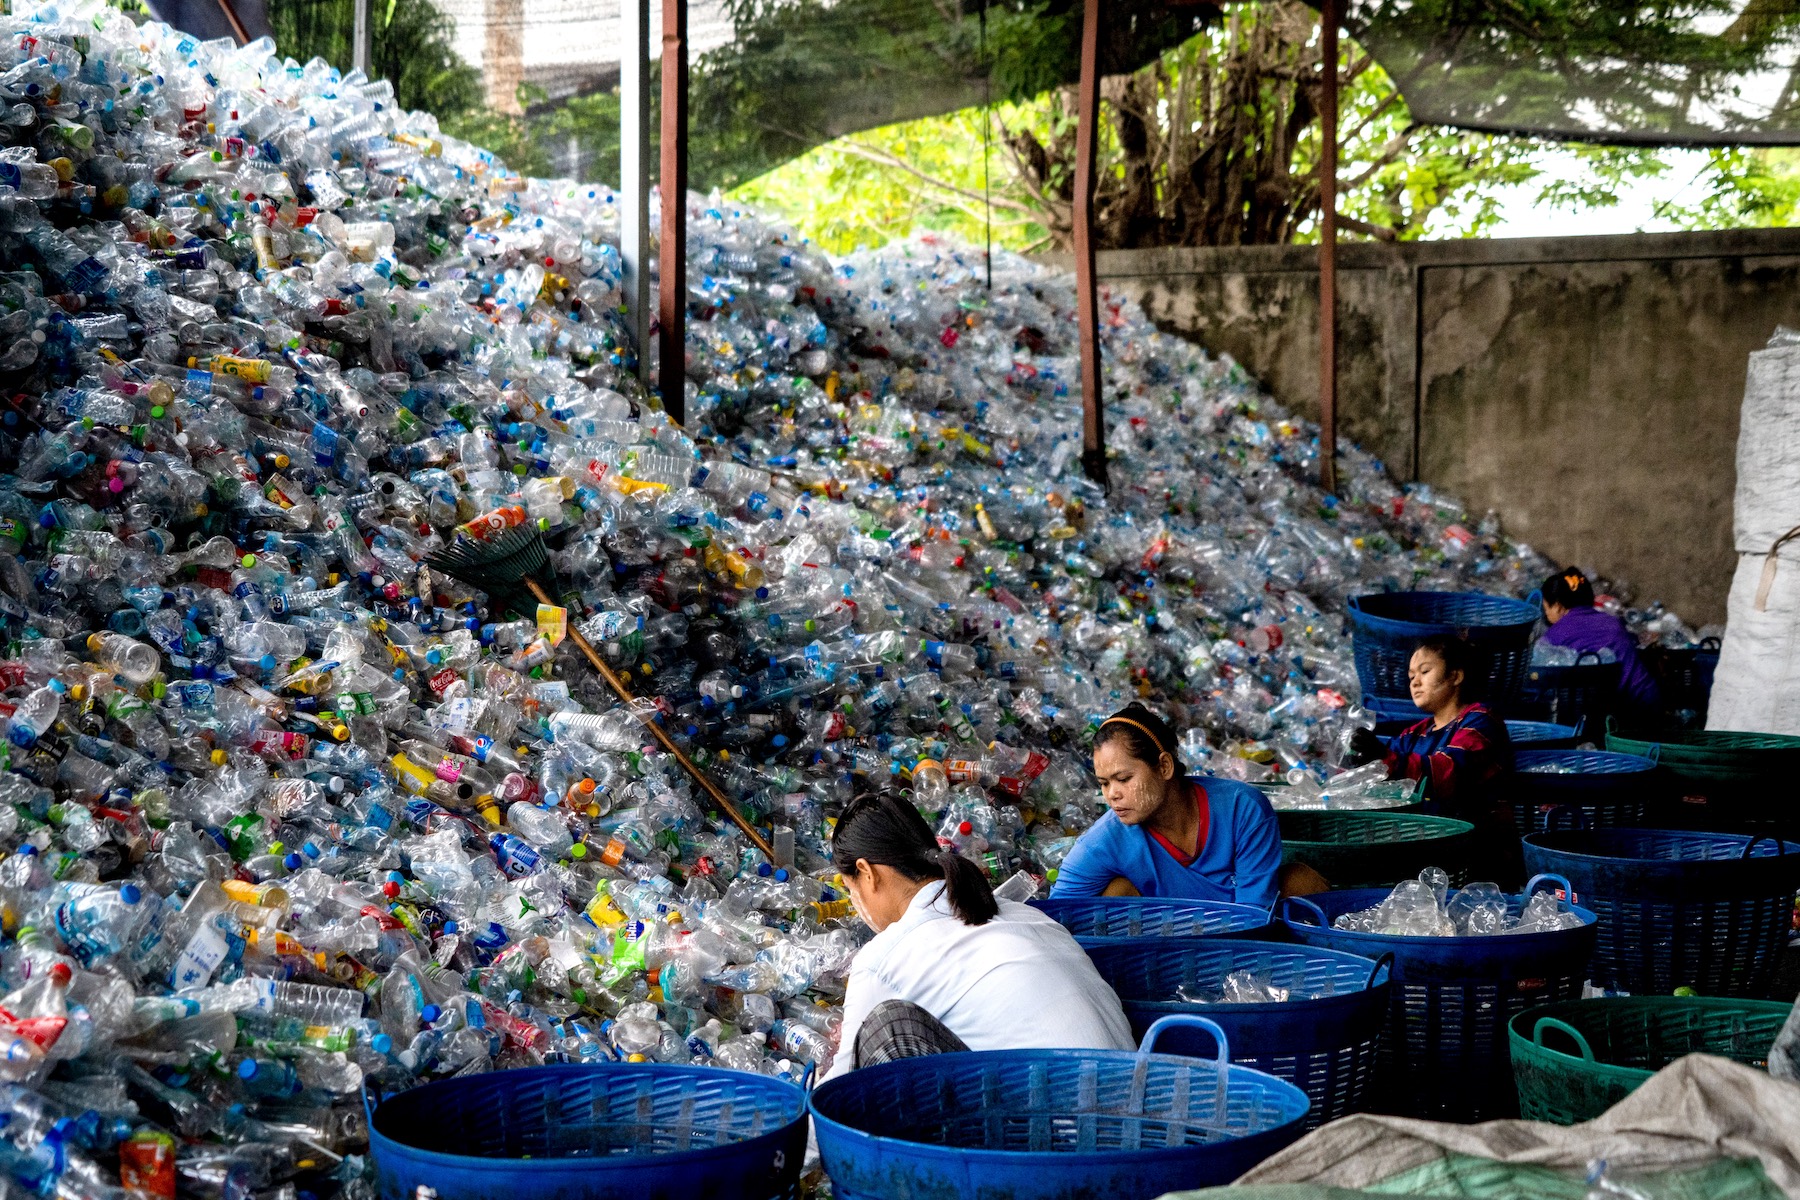 Workers sort through thousands of recyclable plastic bottles at an outdoor sorting facility